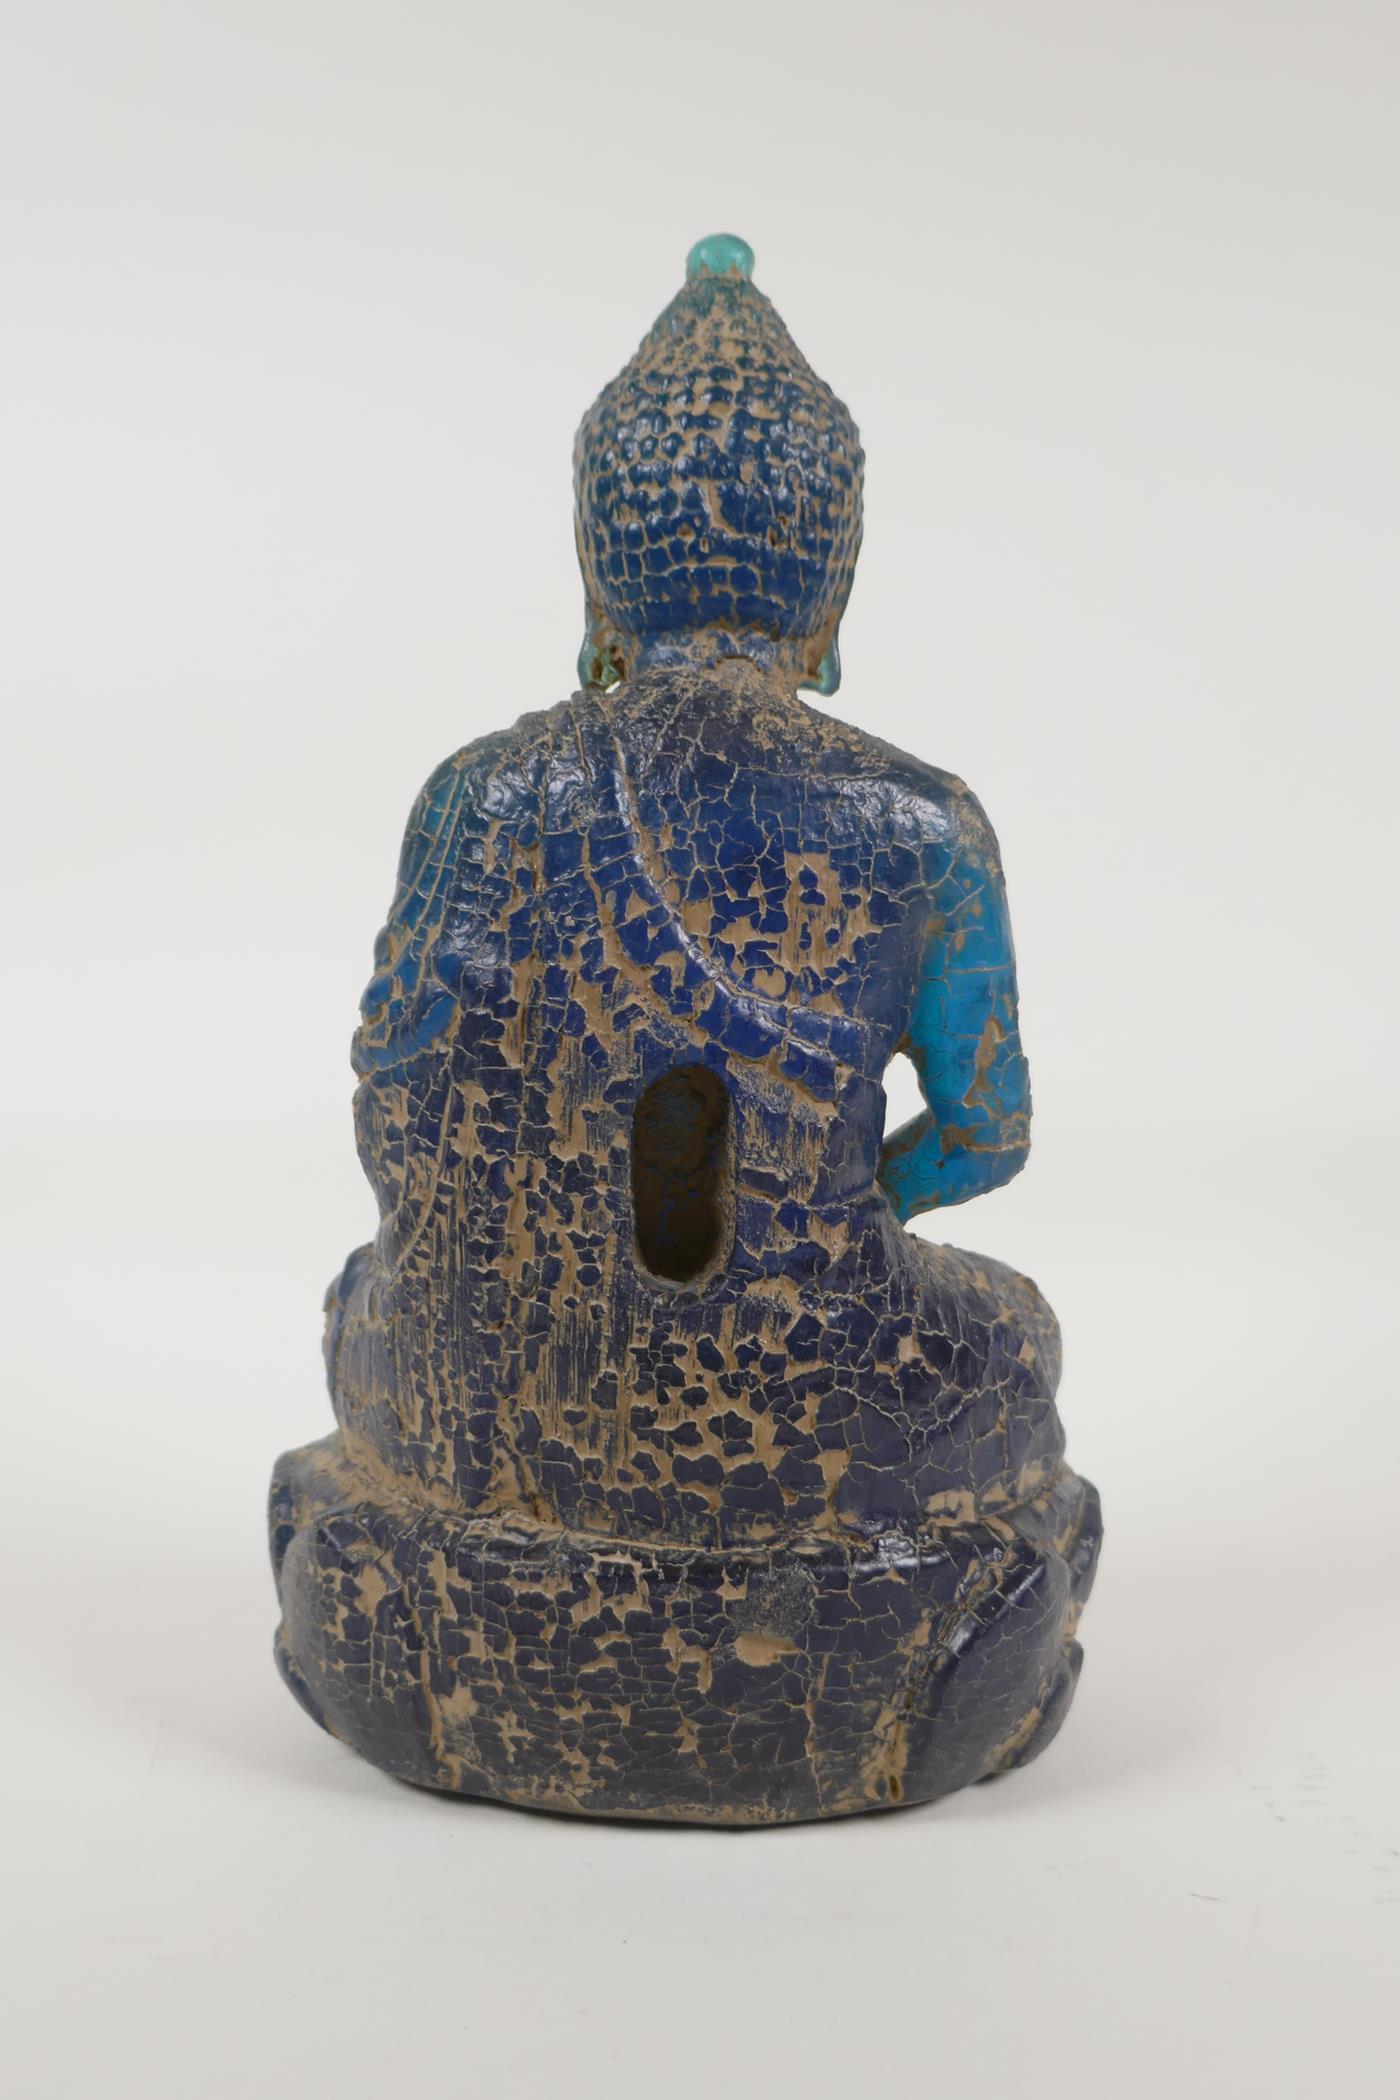 A Chinese archaic style blue composition figure of buddha with a distressed finish, 10" high - Image 3 of 3